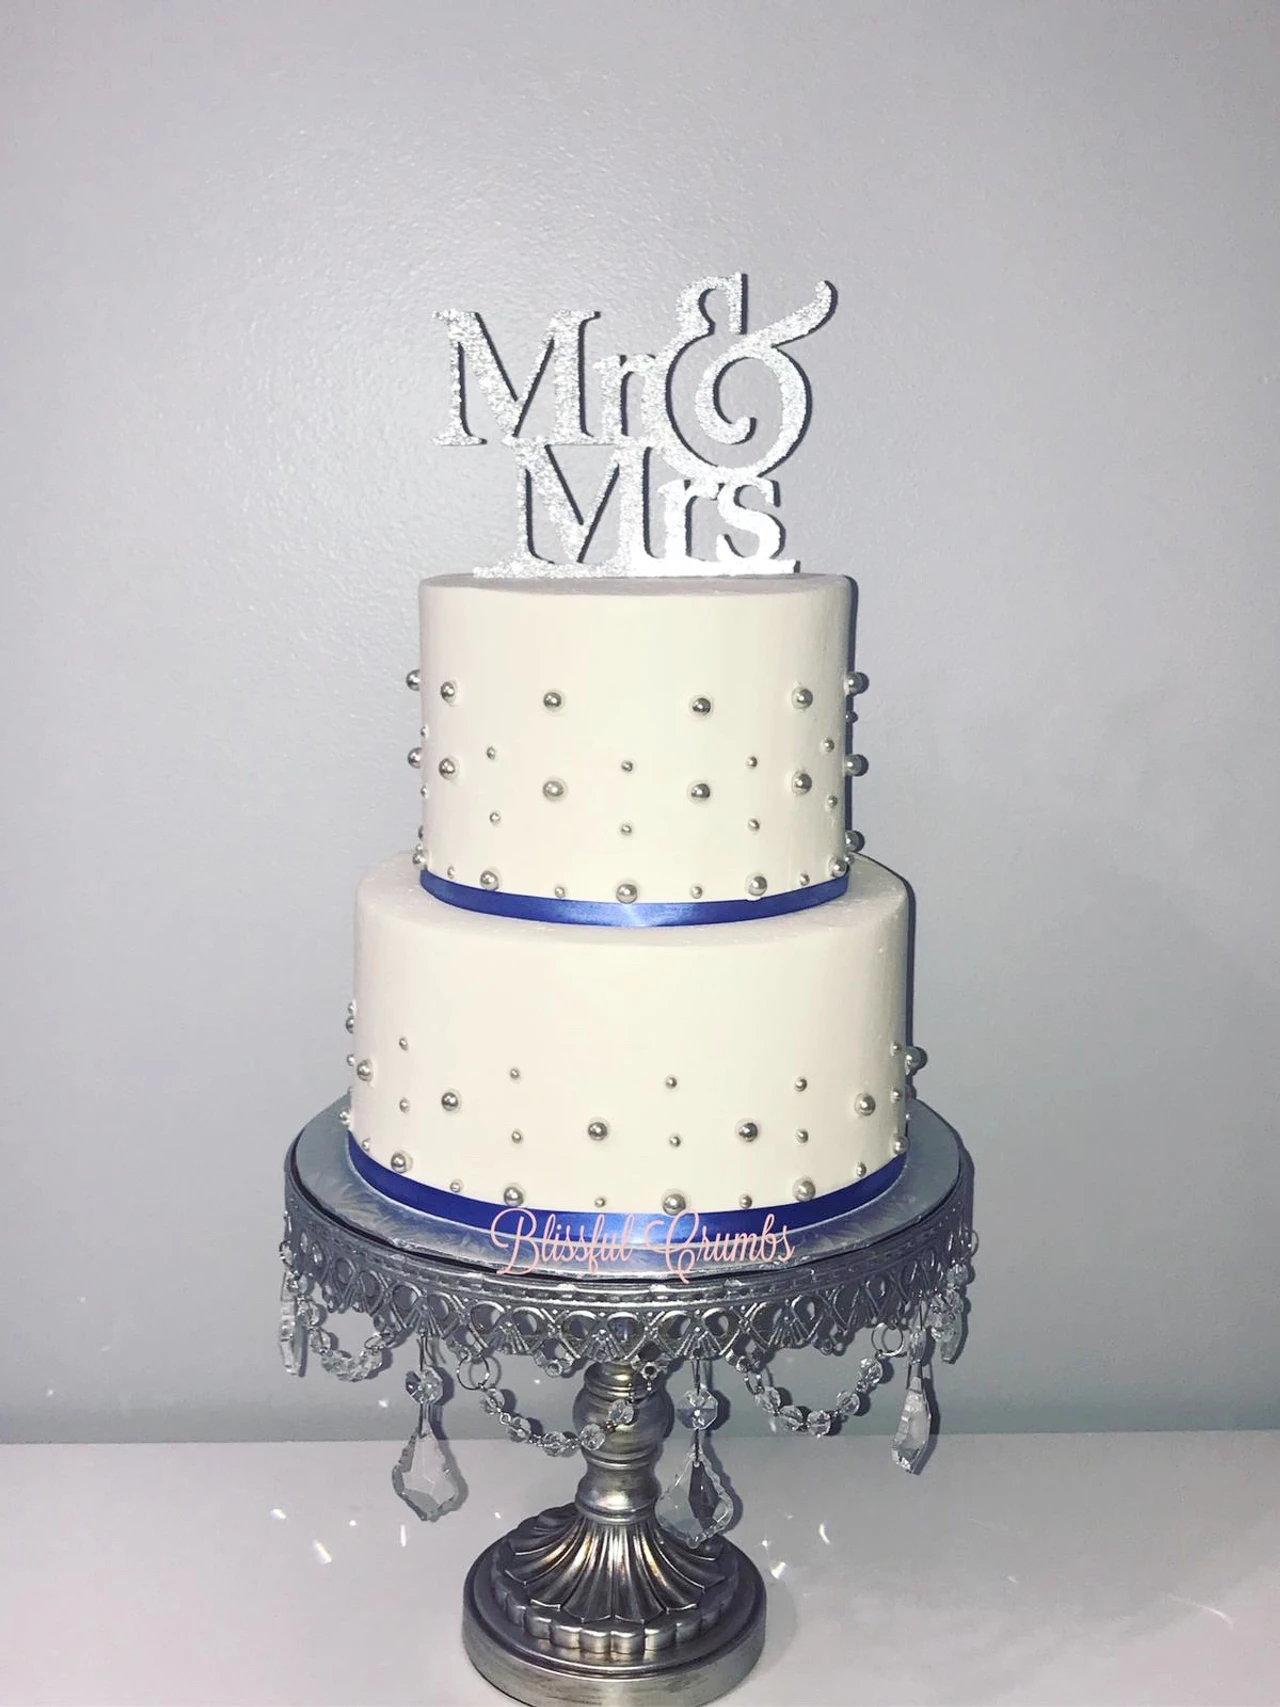 White cake with Mr & Mrs topper on a silver cake stand